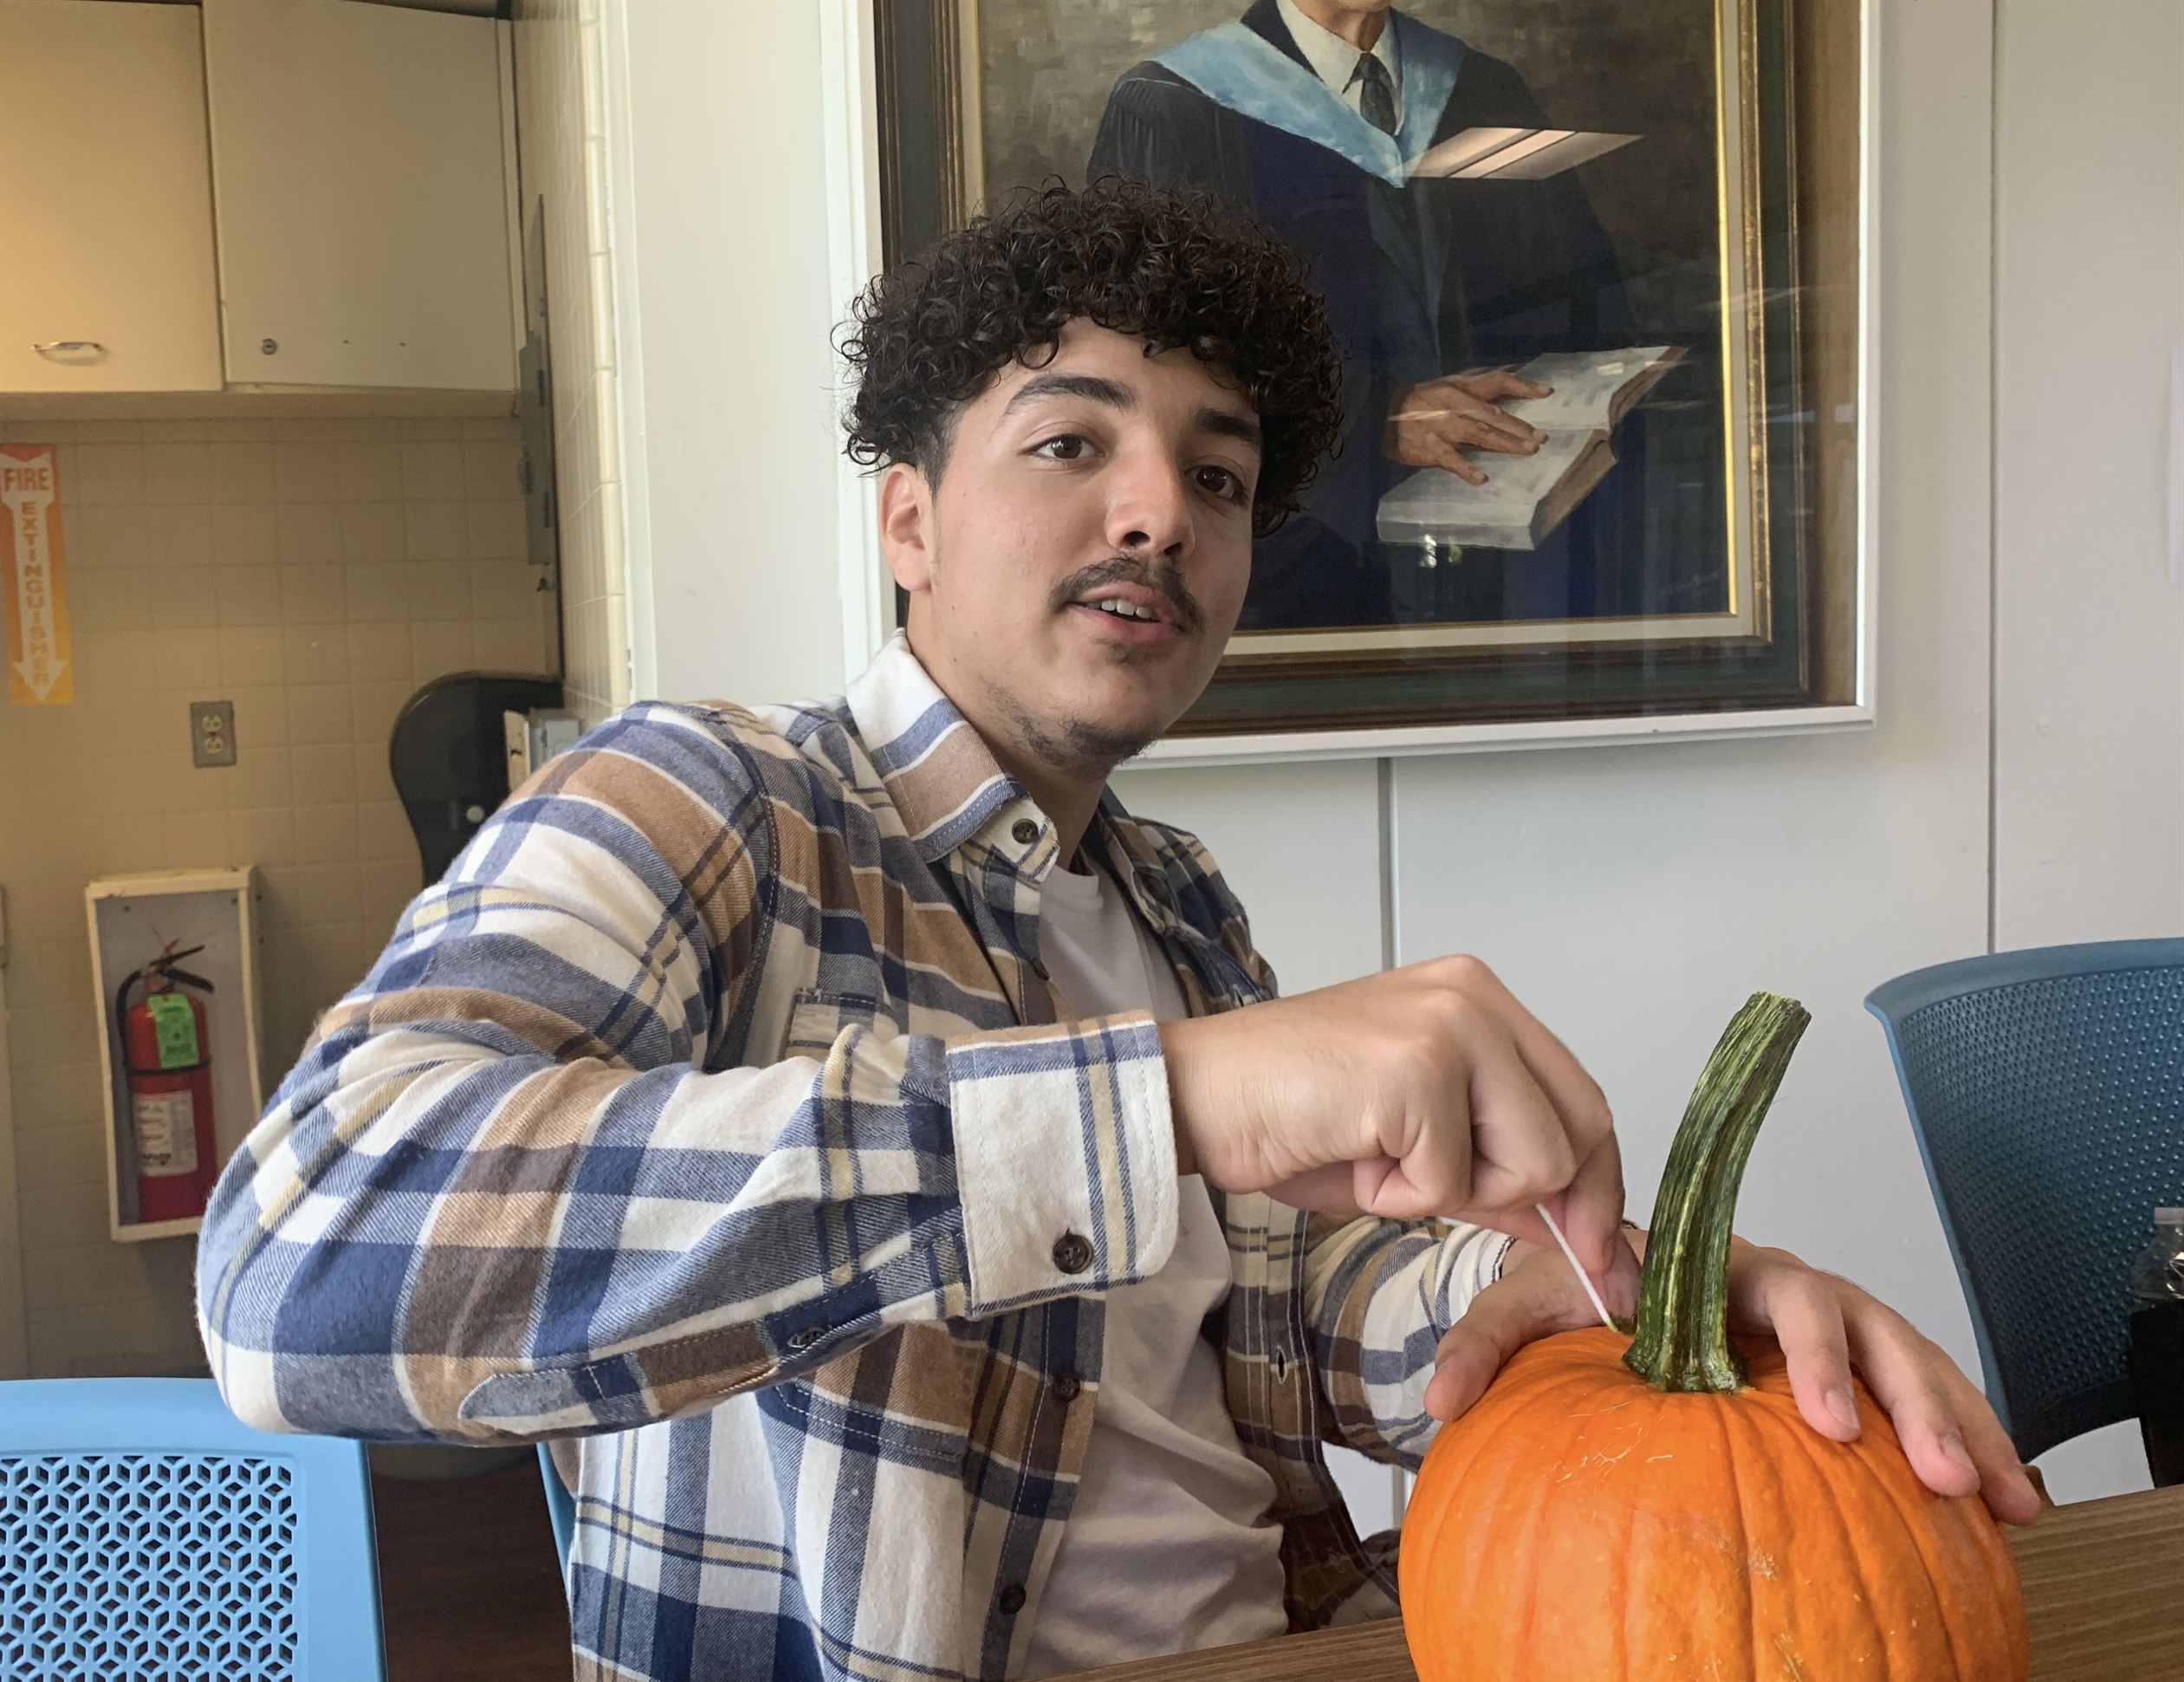 Joshua Fernandez, a sophomore mathematics major, is glad to see that the university offer so many fall events. Roxanne Gribbin | The Montclarion